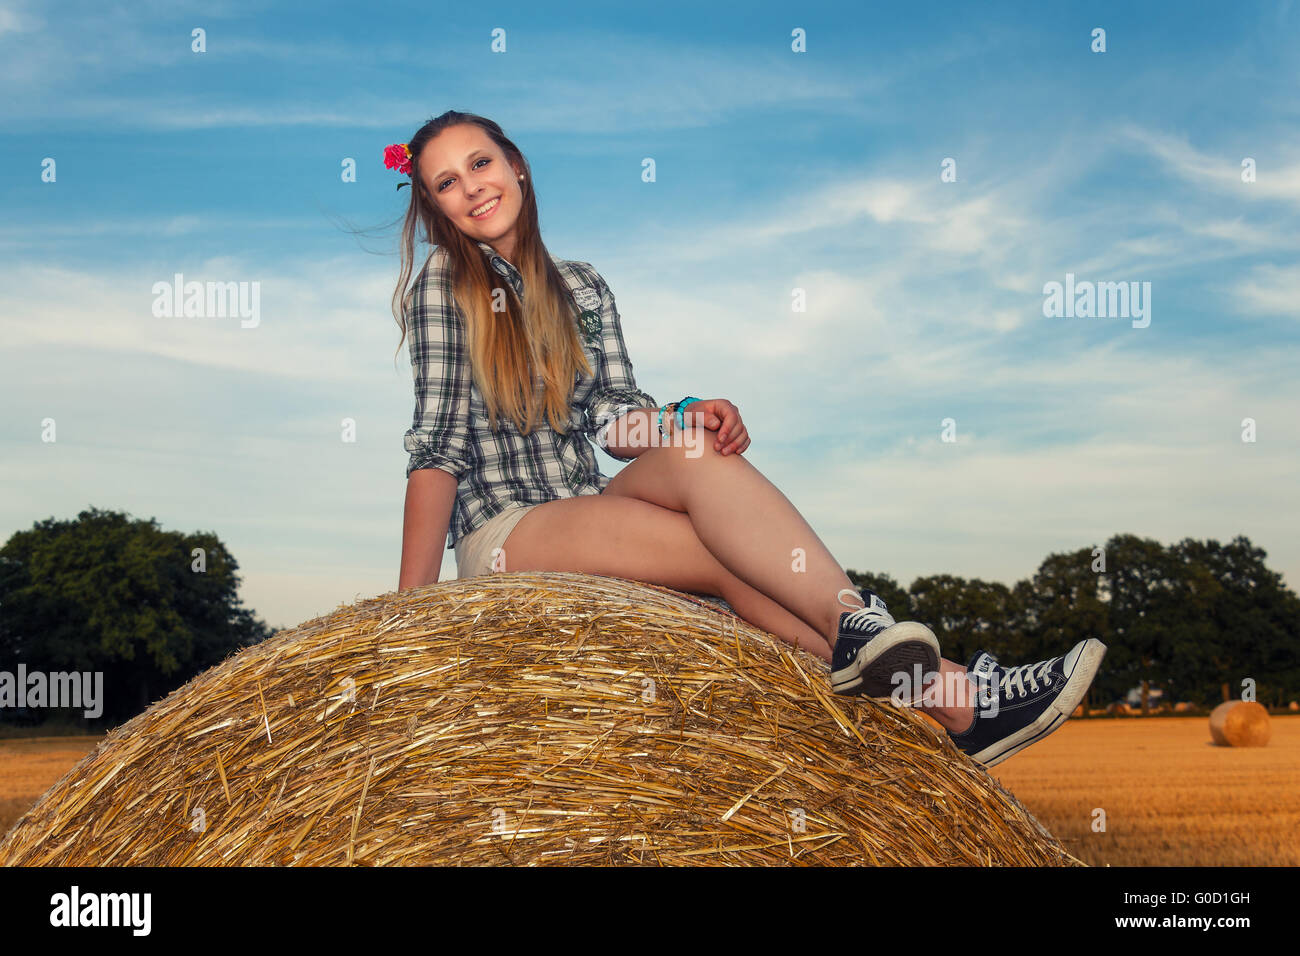 Young woman sitting on a straw bale Stock Photo